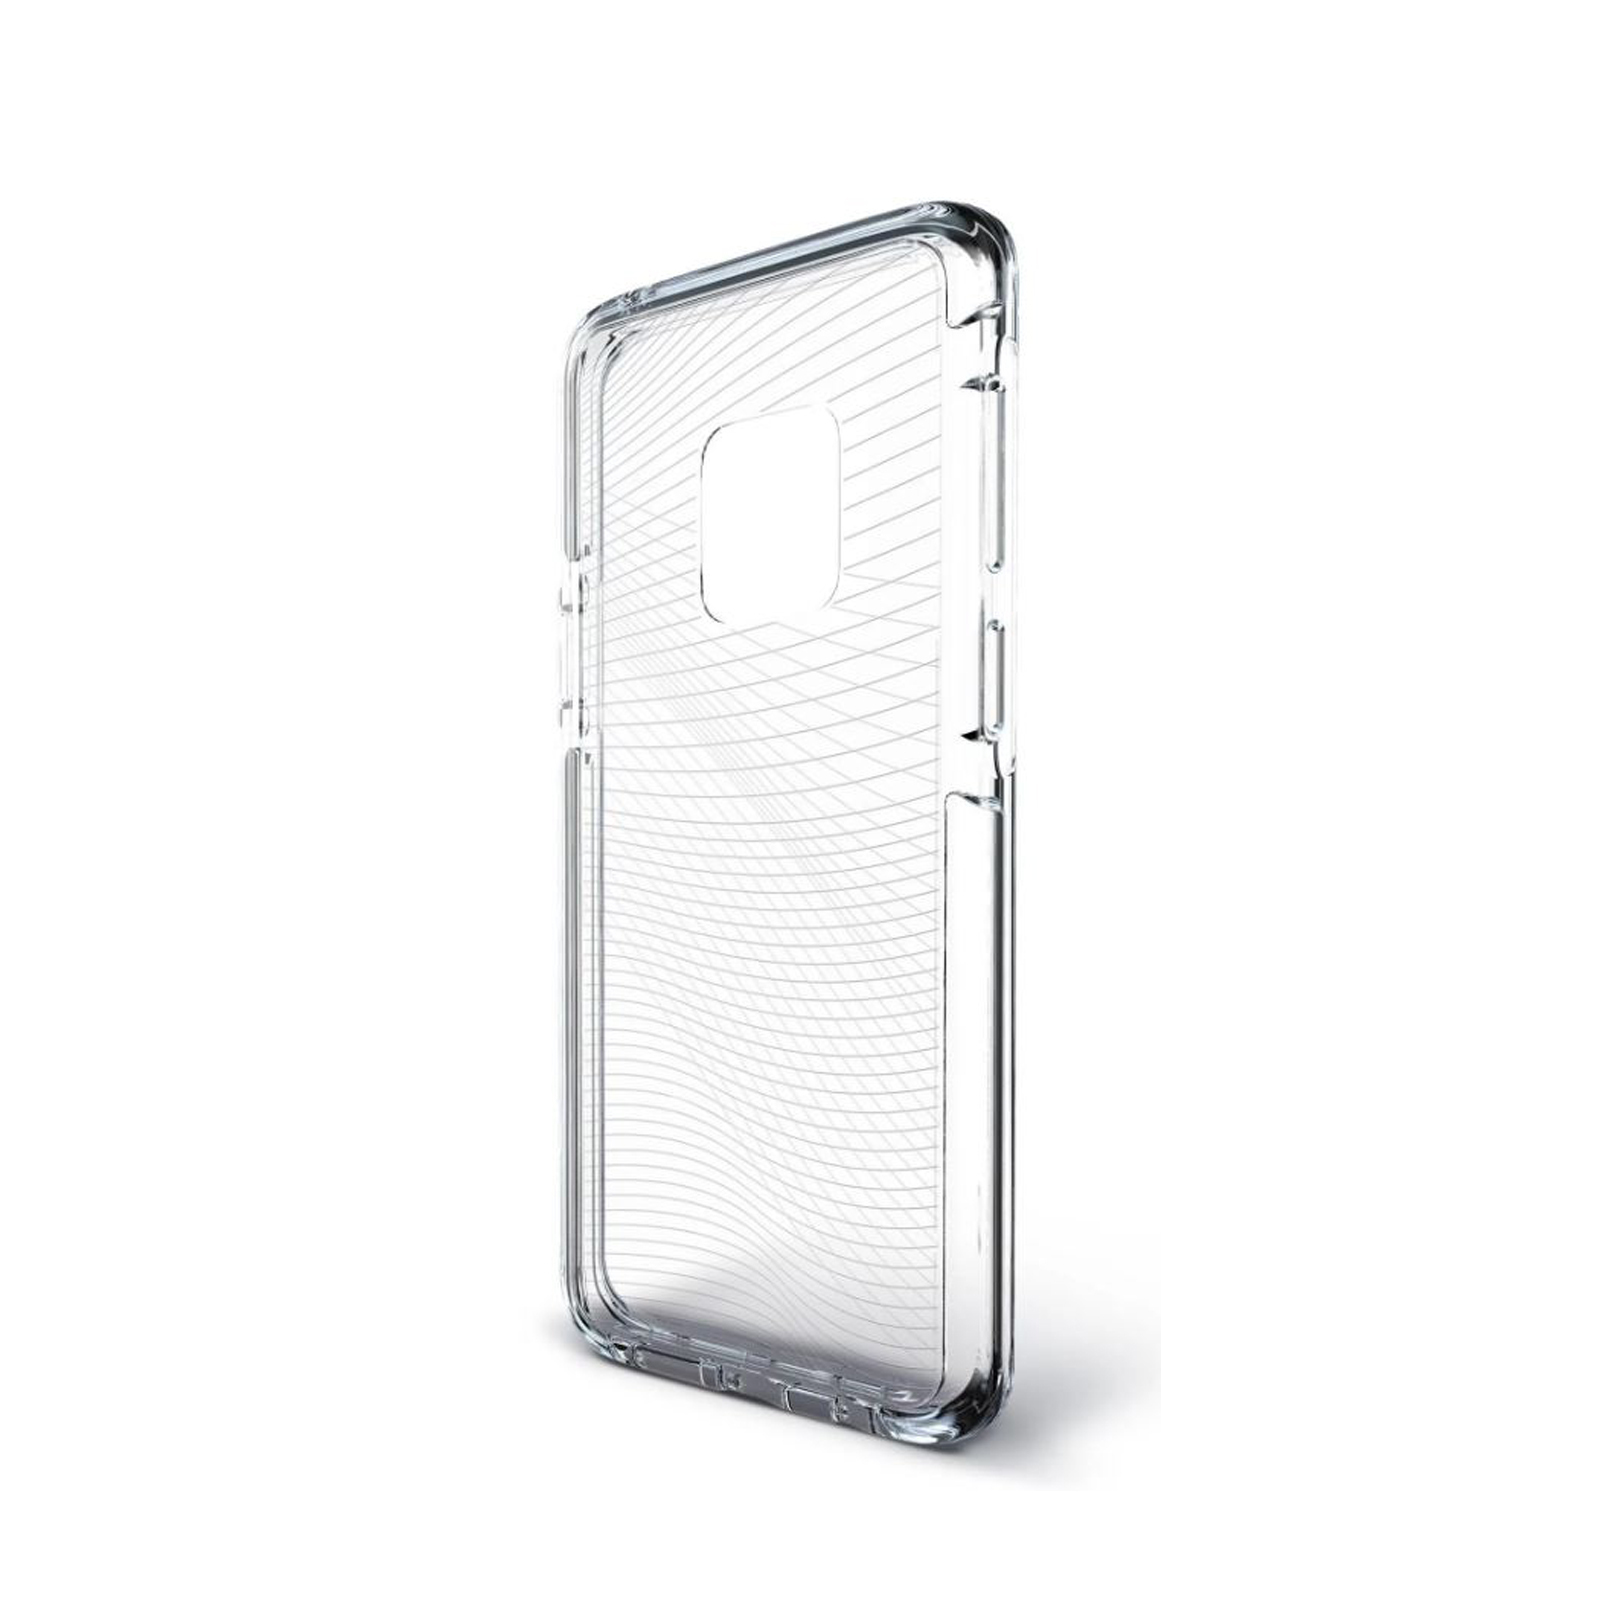 AceFly Samsung Galaxy S9 Plus Clear Case Brand New